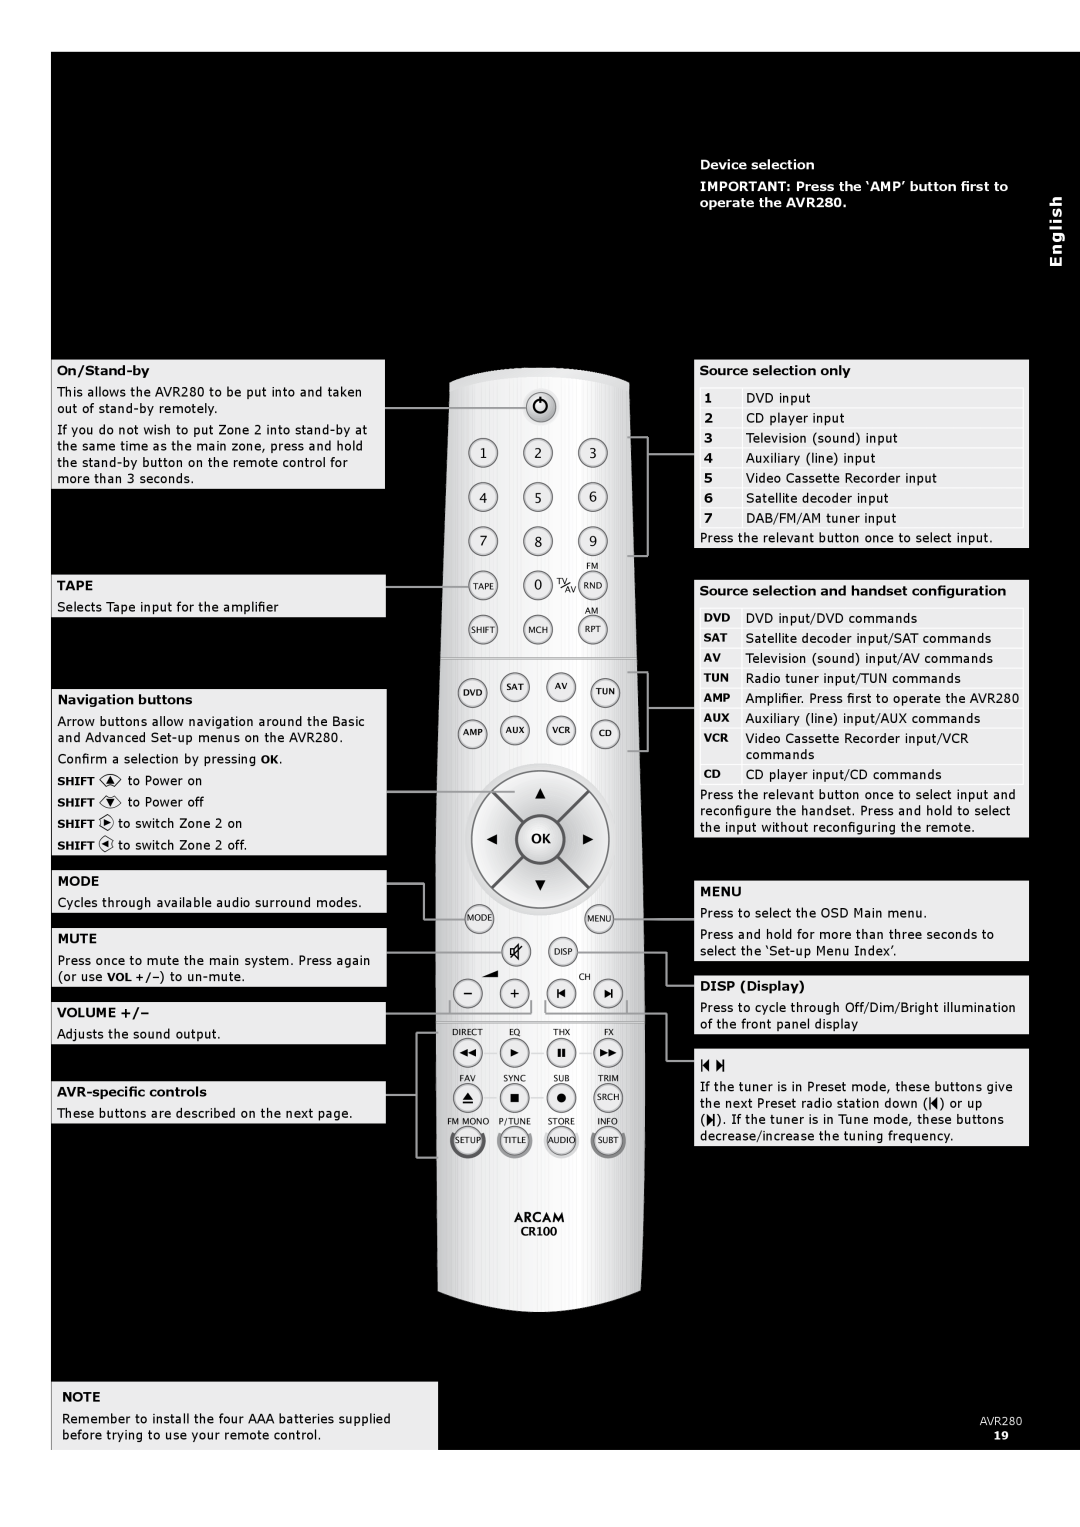 Arcam AVR280 manual CR100 Universal remote control, Device selection, IMPORTANT Press the ‘AMP’ button first to, English 